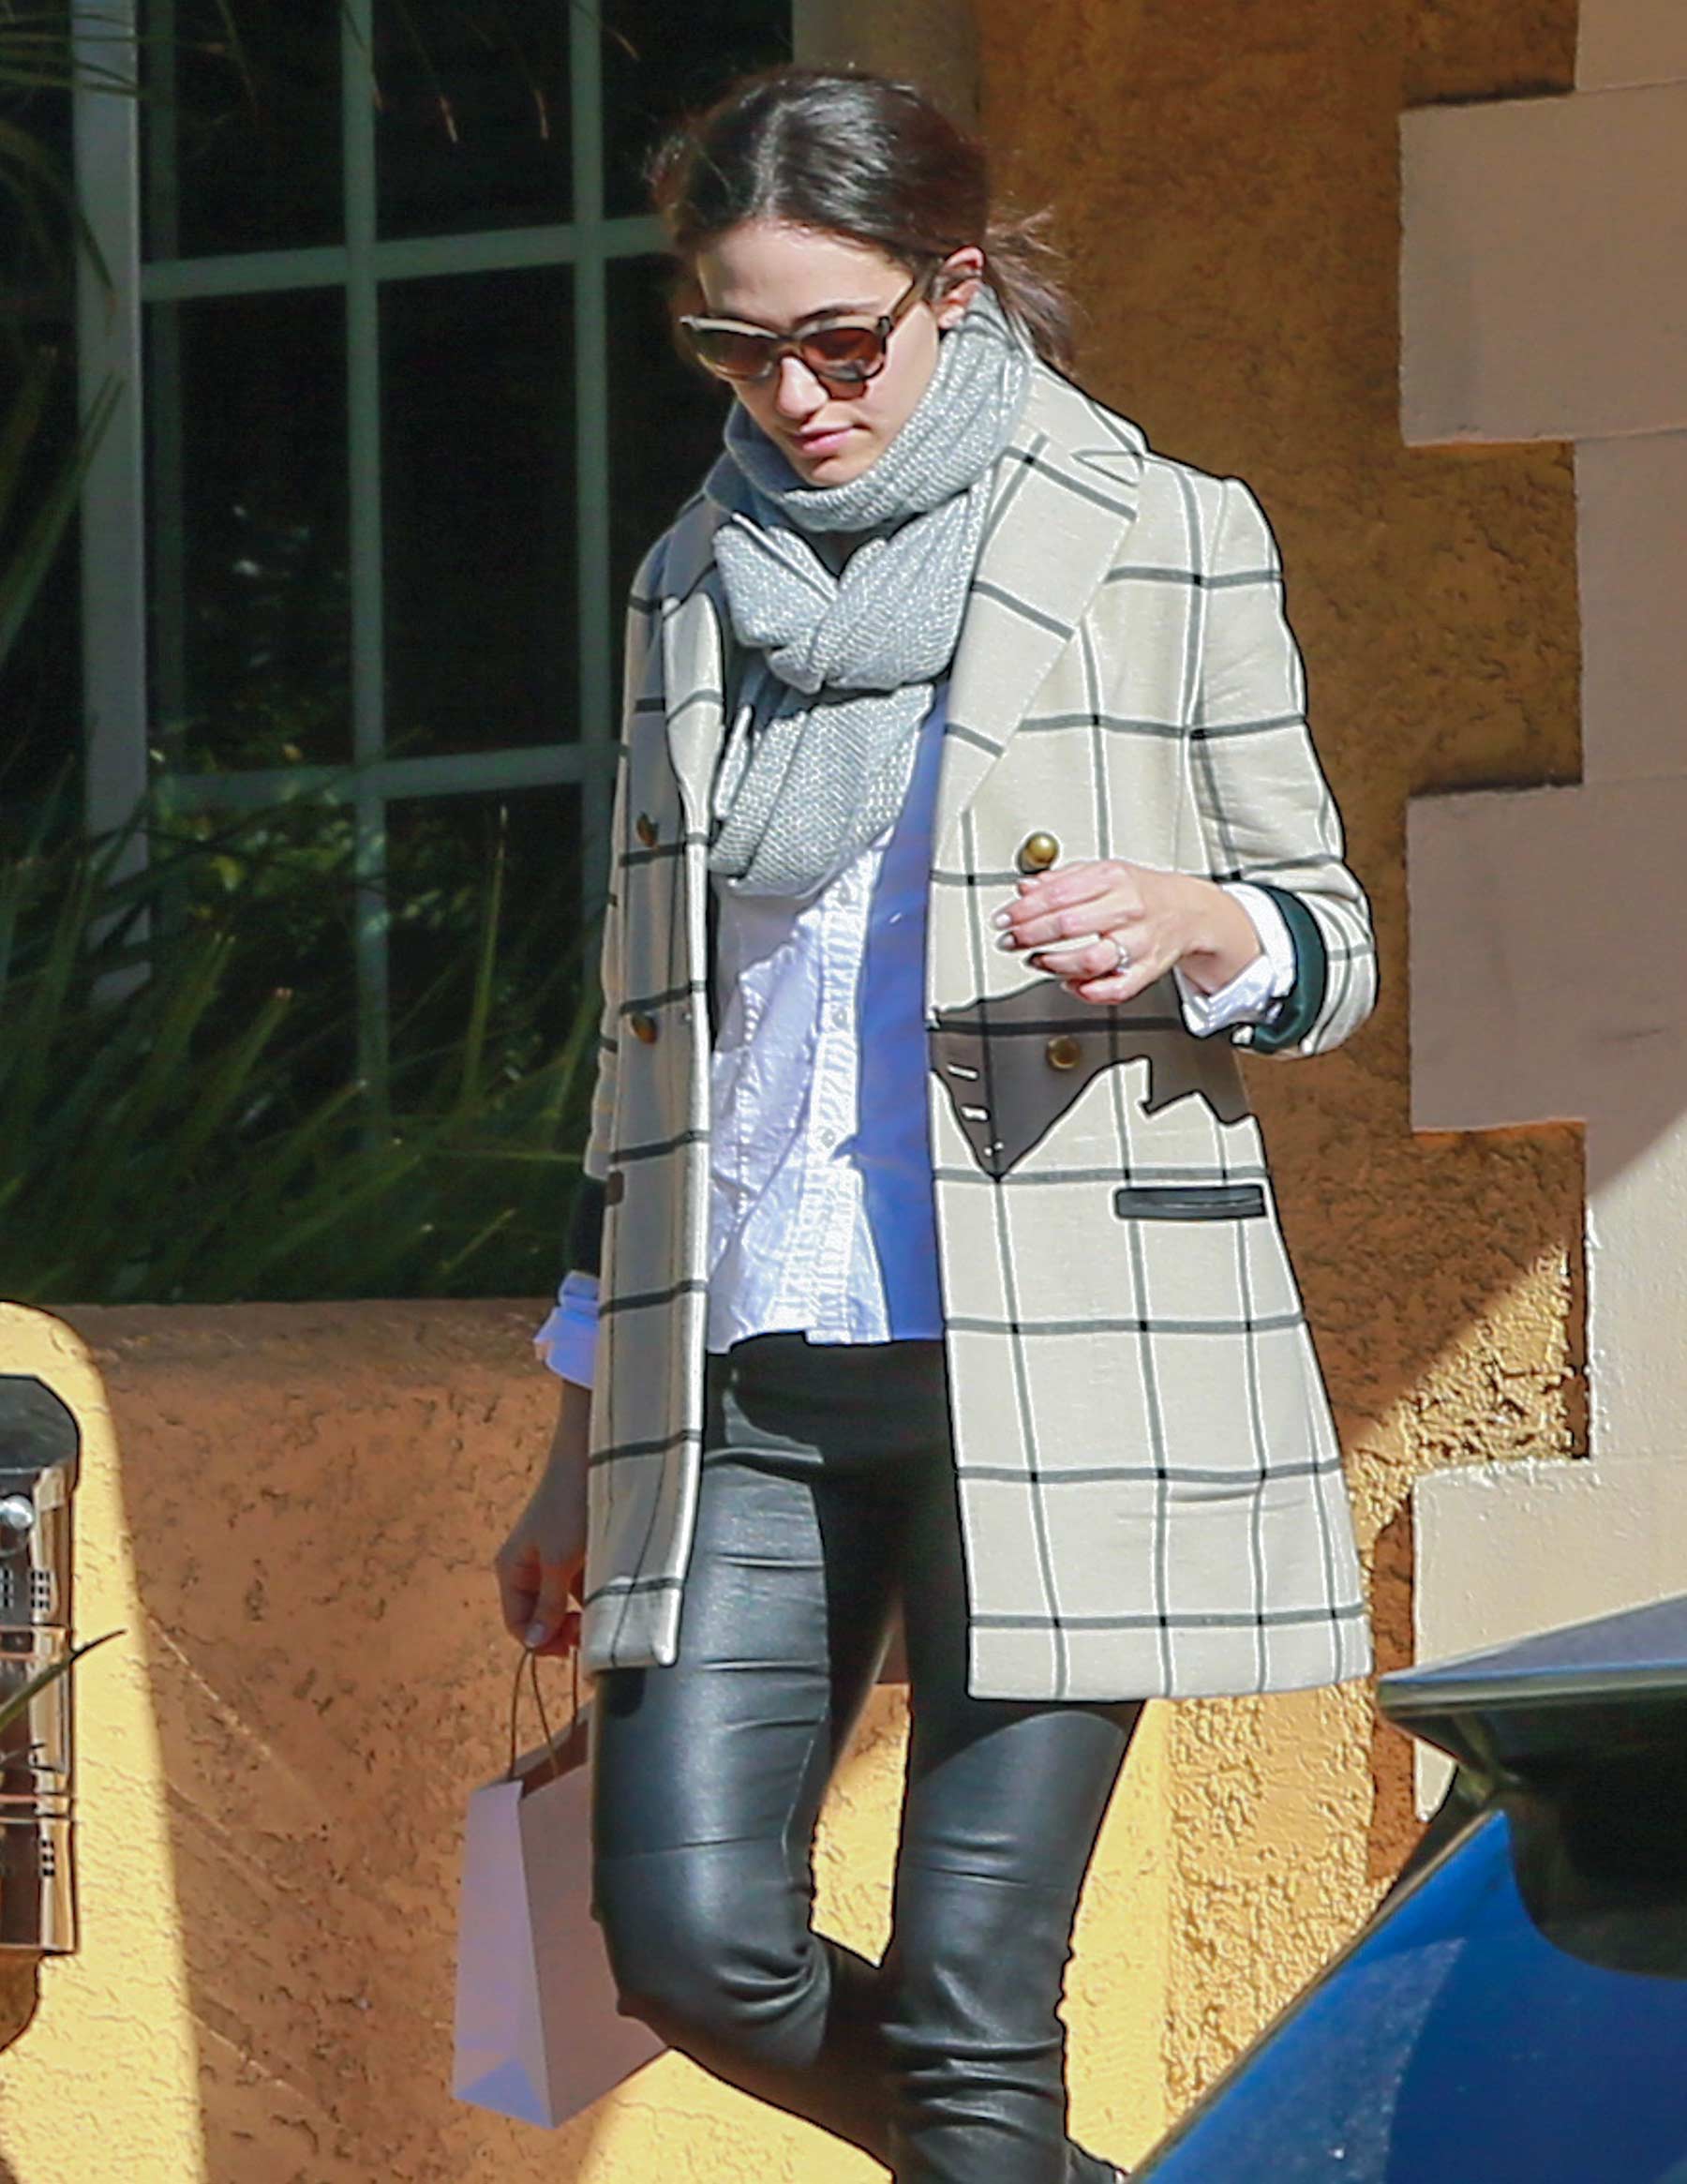 Emmy Rossum out in LA